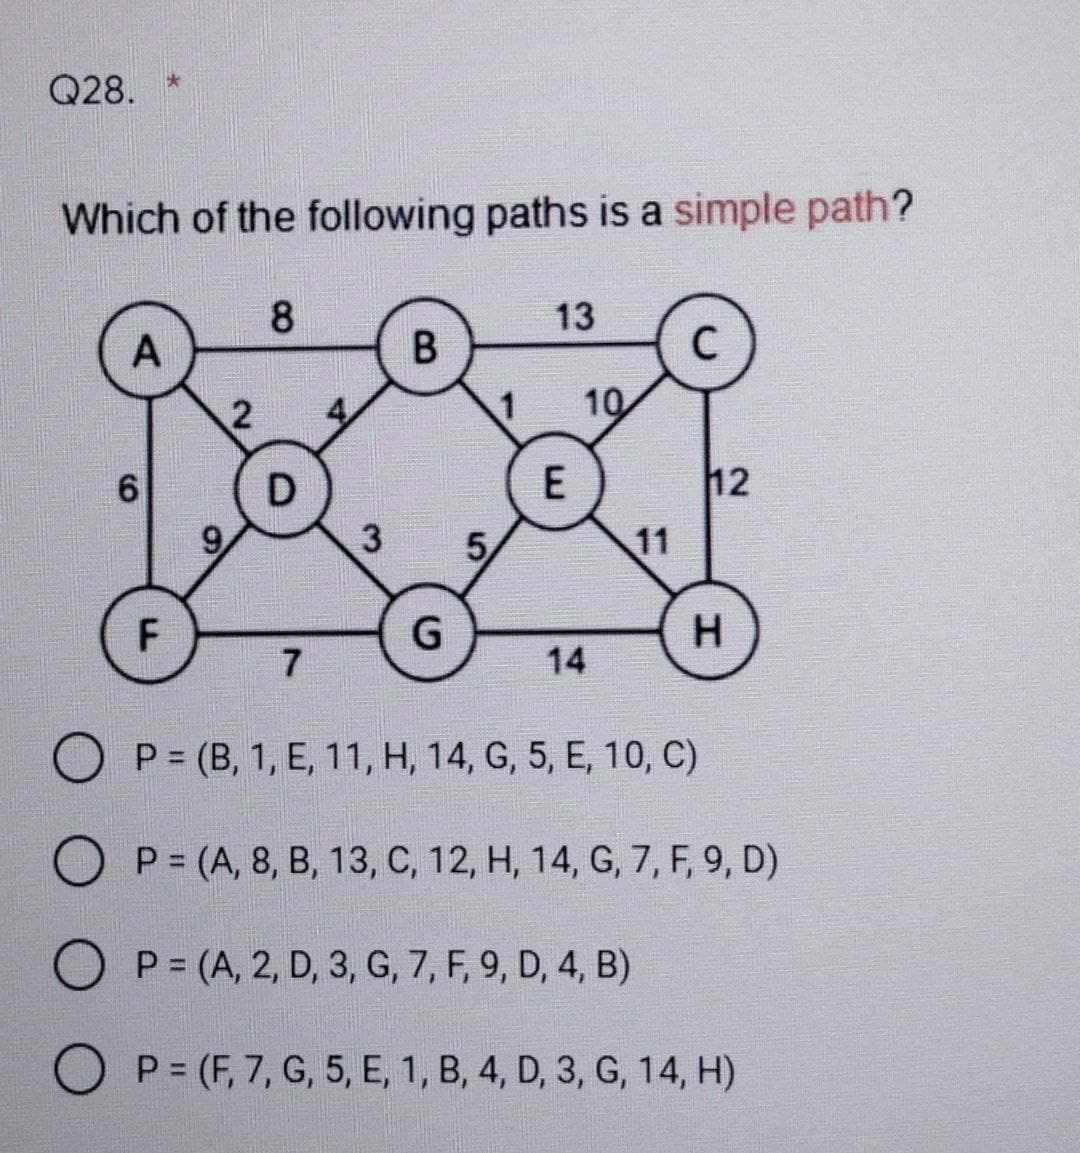 Q28.
Which of the following paths is a simple path?
A
6
F
2
8
D
7
3
B
G
5
13
E
10
14
11
C
12
H
OP= (B, 1, E, 11, H, 14, G, 5, E, 10, C)
P = (A, 8, B, 13, C, 12, H, 14, G, 7, F, 9, D)
P= (A, 2, D, 3, G, 7, F, 9, D, 4, B)
OP= (F, 7, G, 5, E, 1, B, 4, D, 3, G, 14, H)